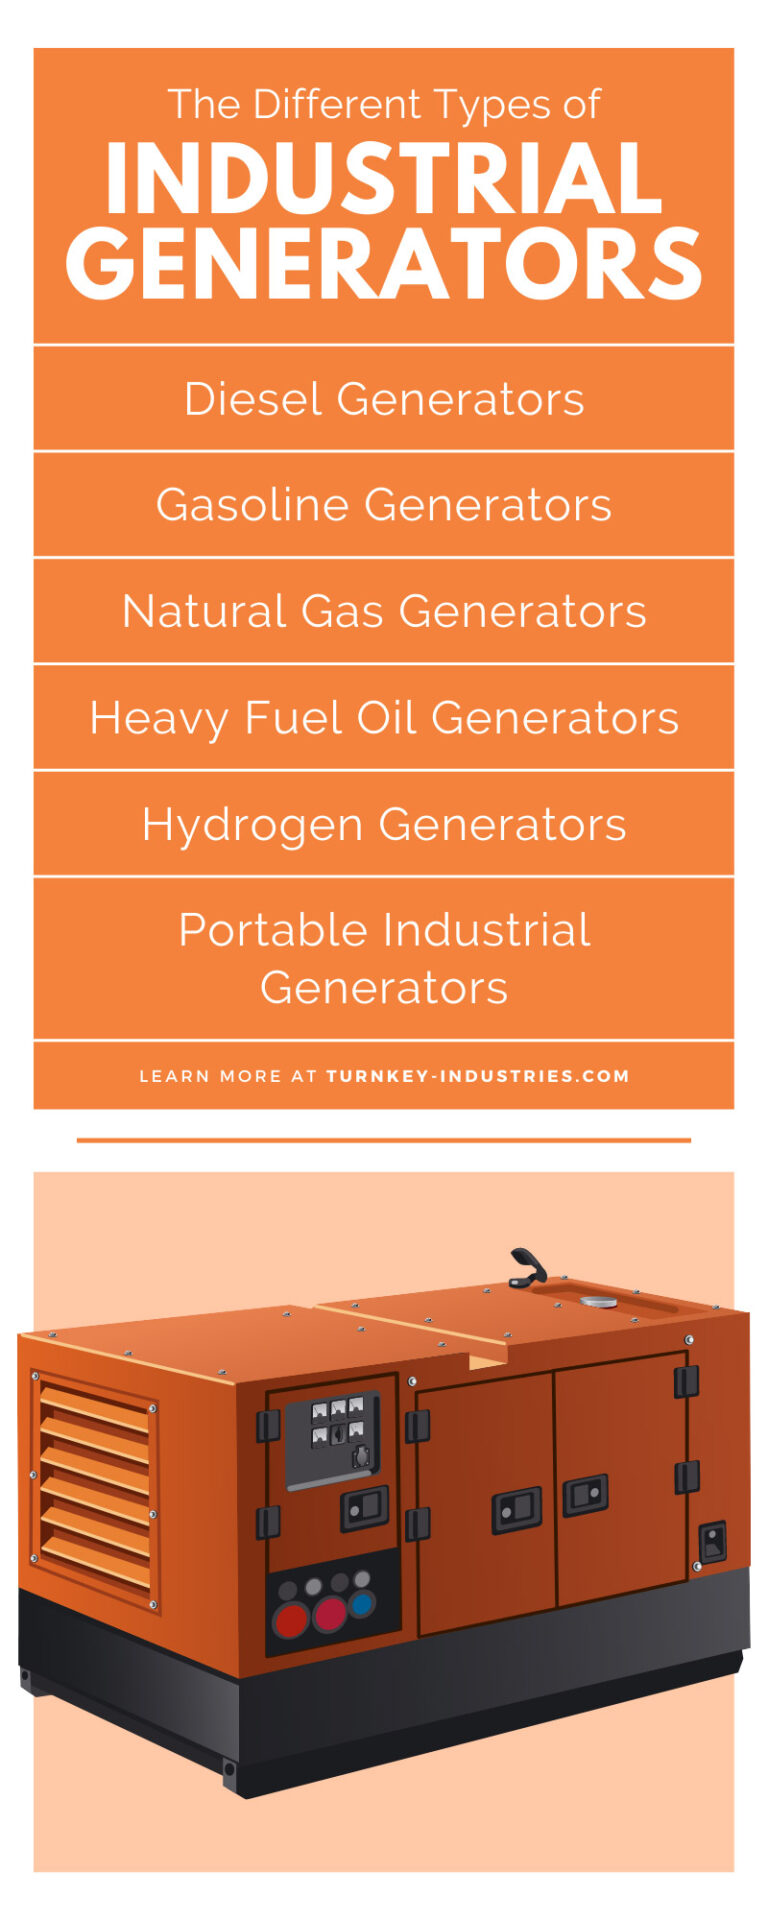 The Different Types of Industrial Generators